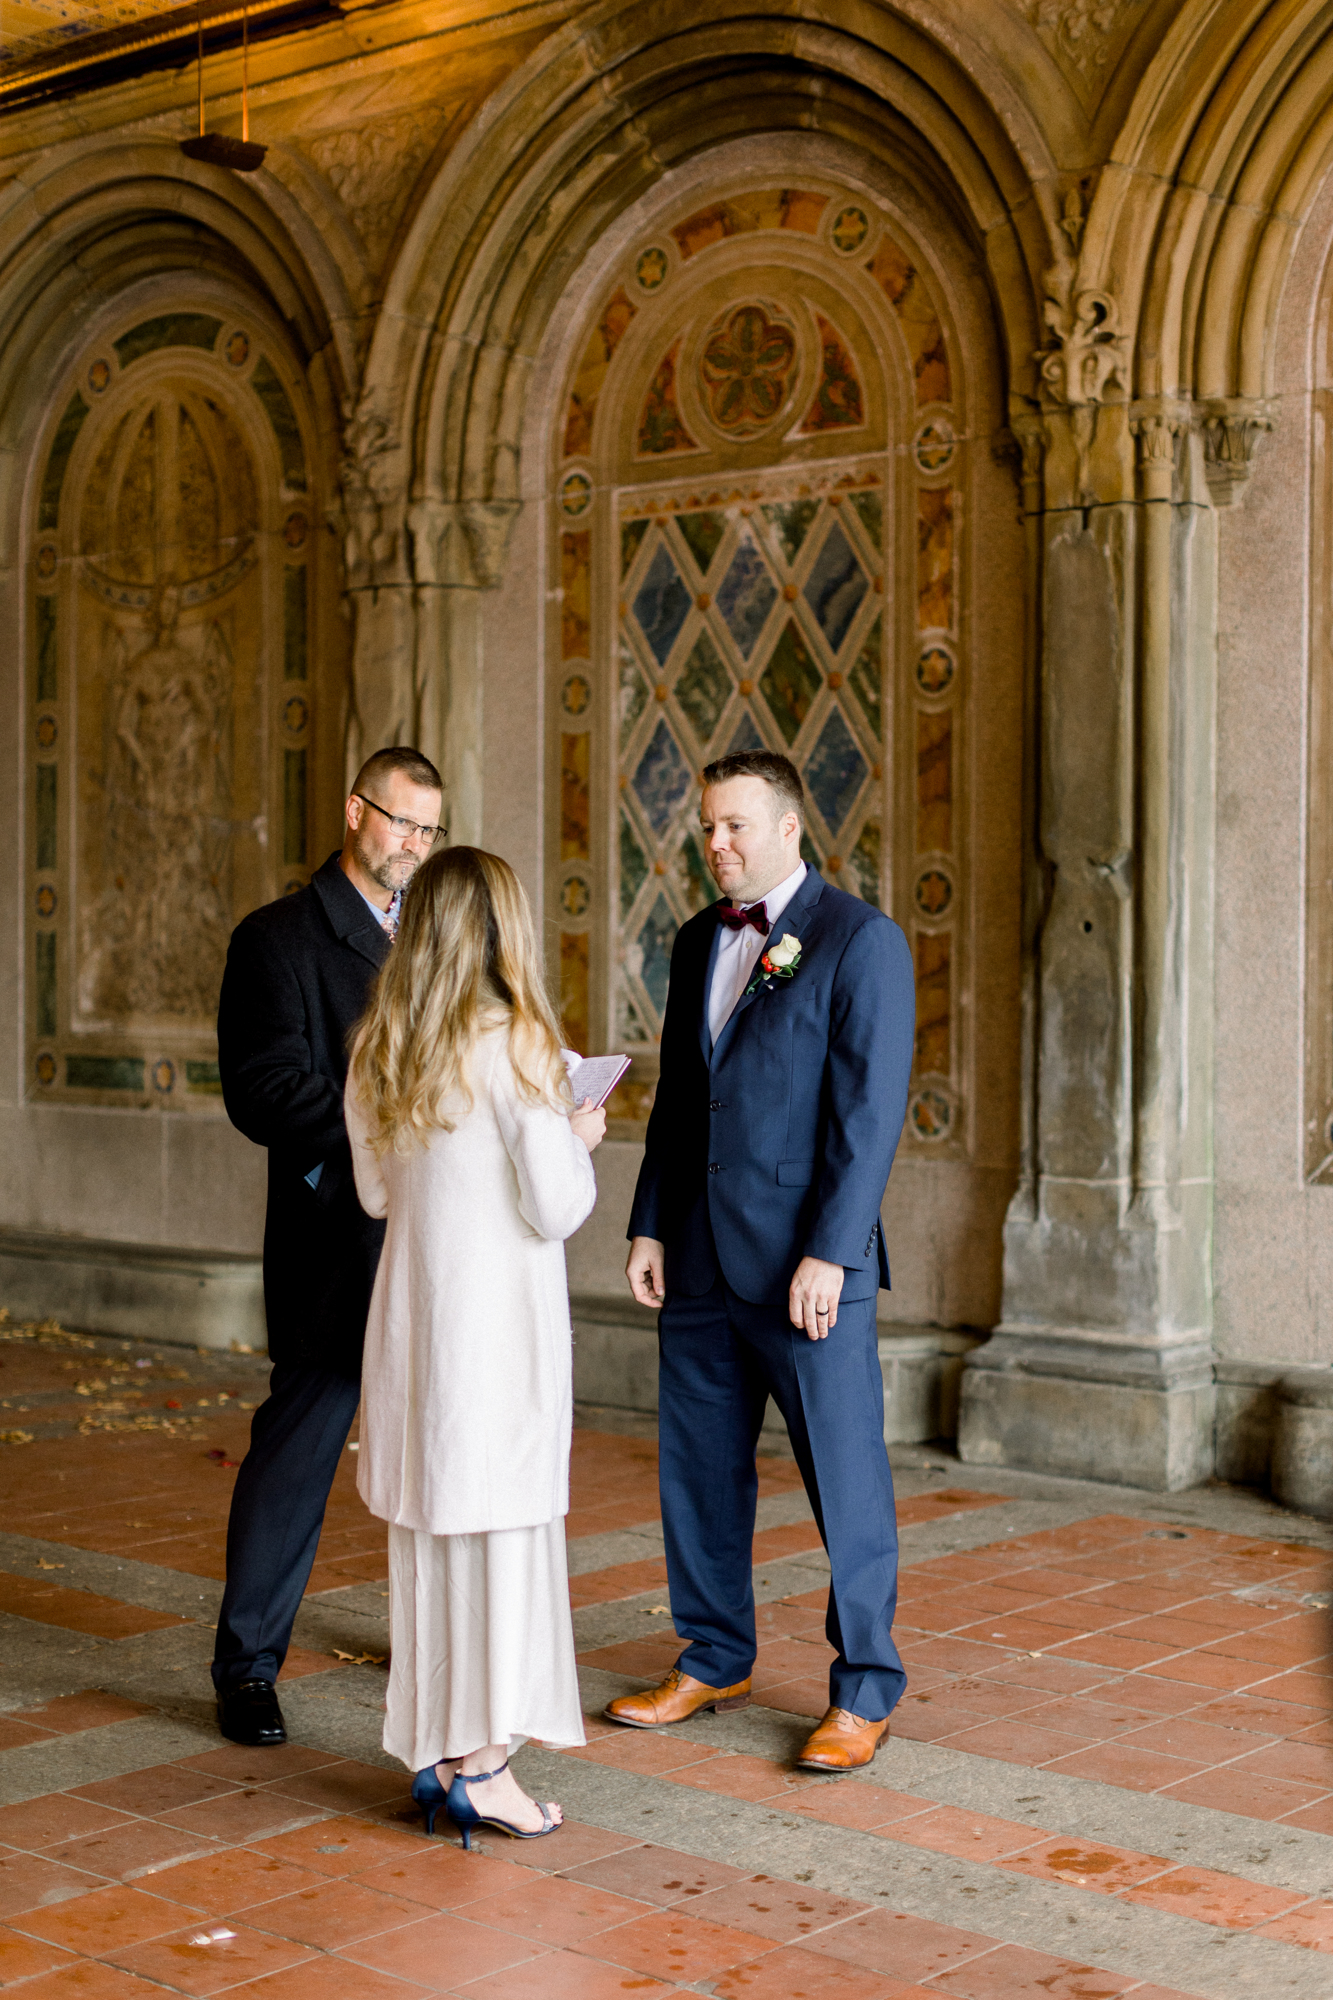 Elopement wedding ceremony at Central Park's Bethesda Terrace